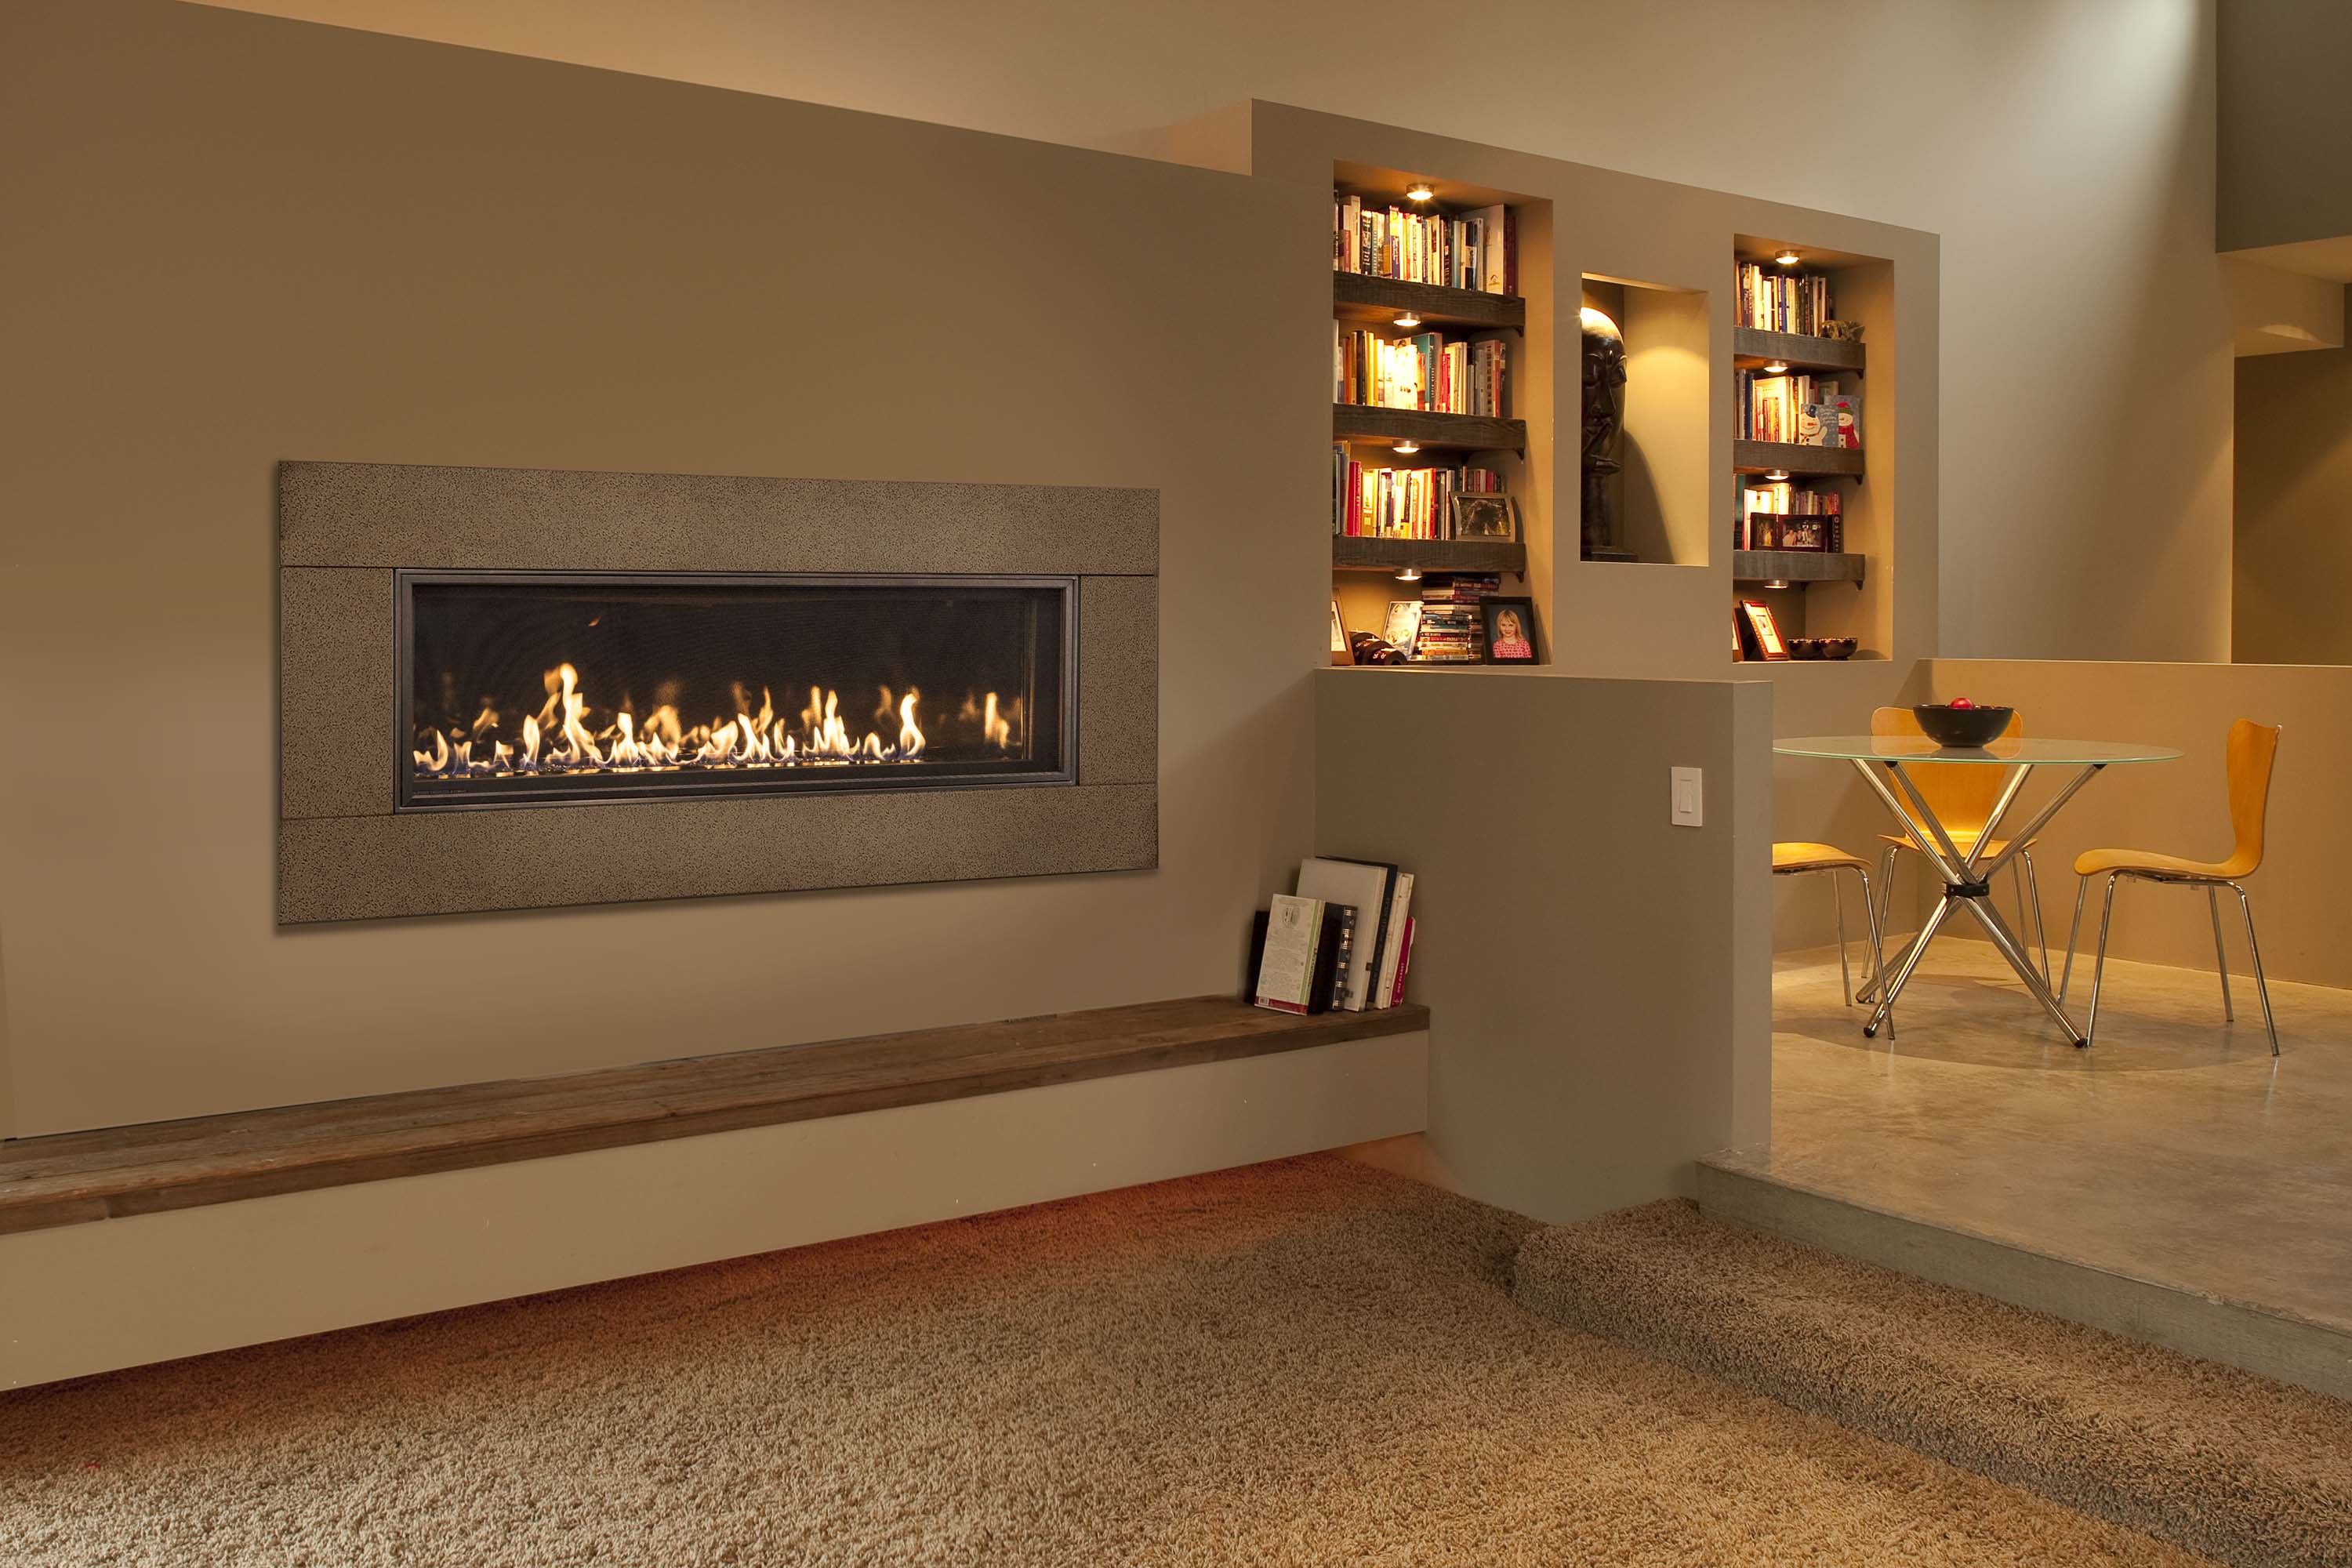 Town & Country TCWS54 Direct Vent Linear Gas Fireplace, Series D2